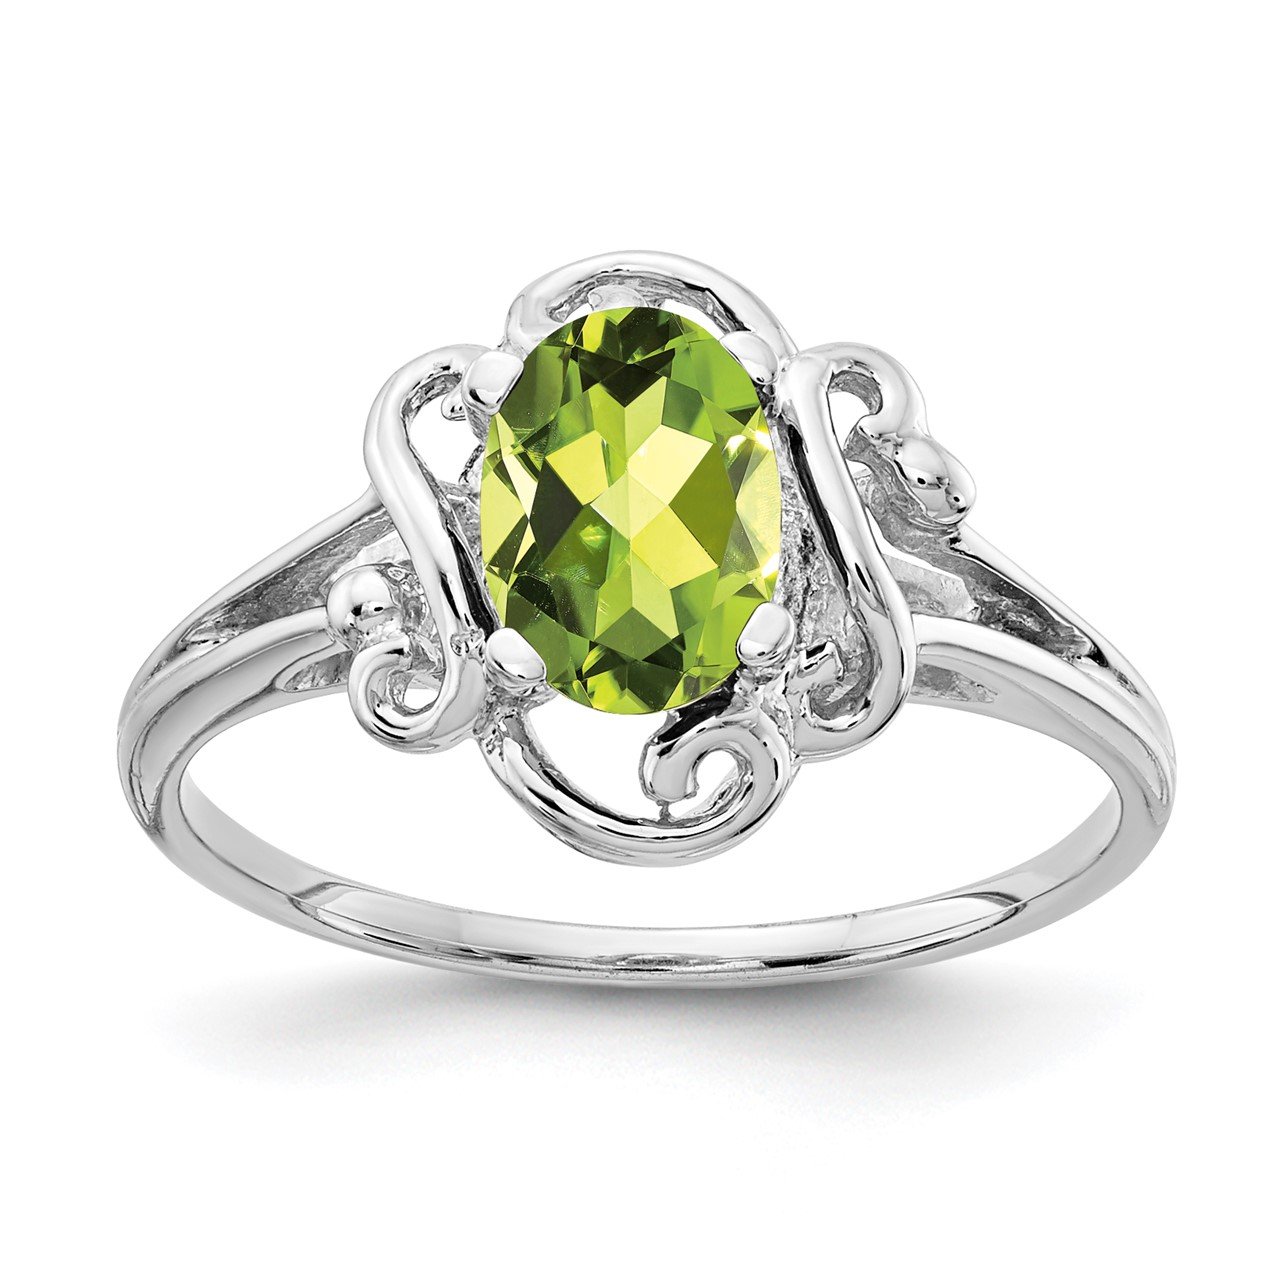 14k White Gold 7x5mm Oval Peridot ring | The Gold Store